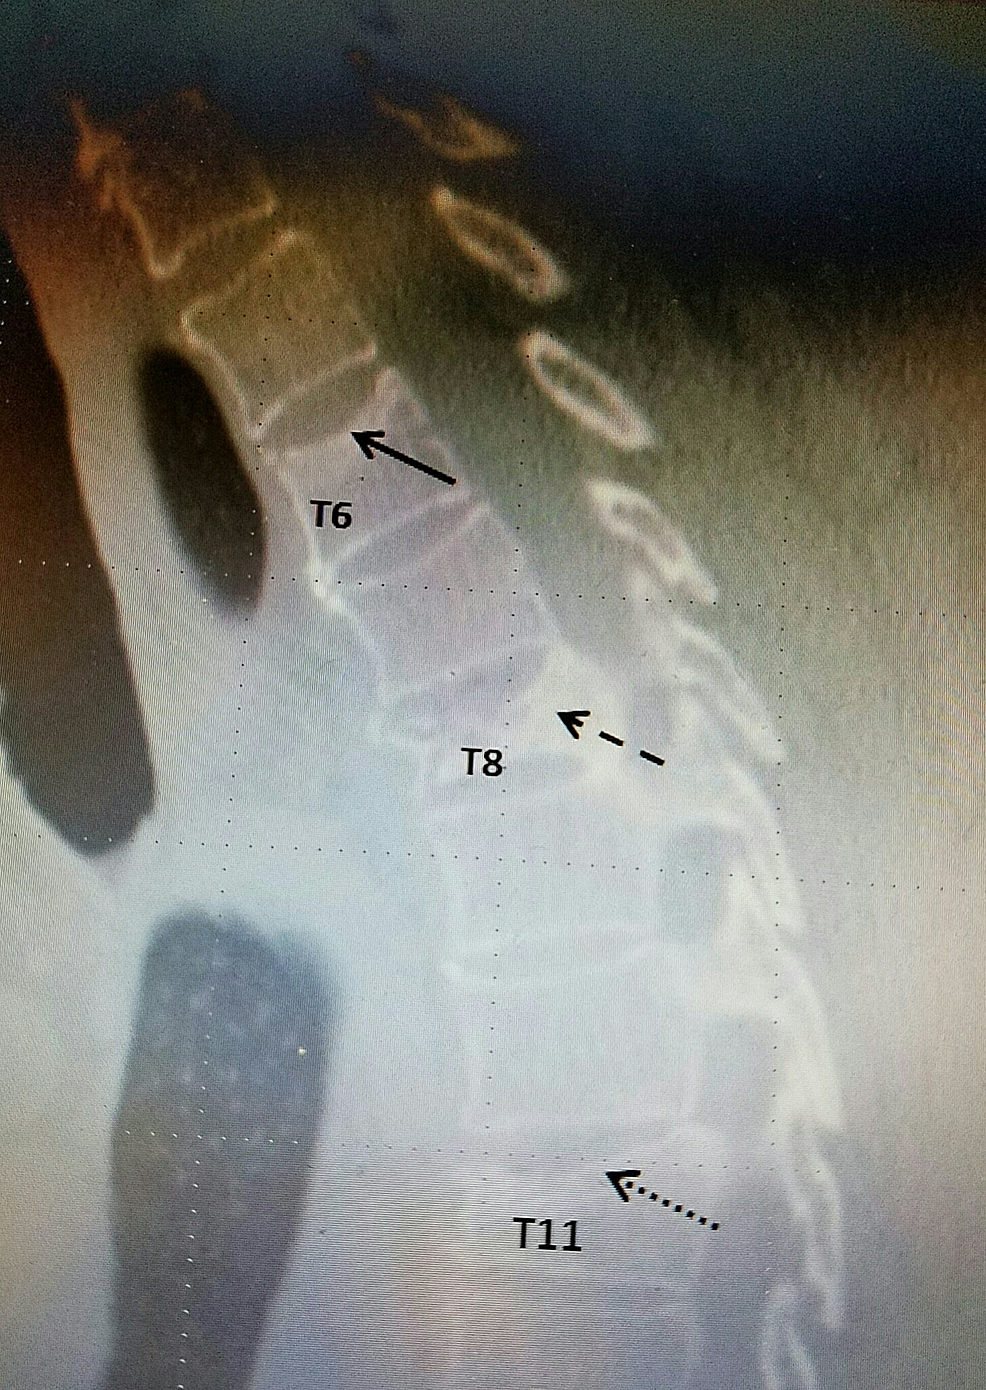 t12 compression fracture